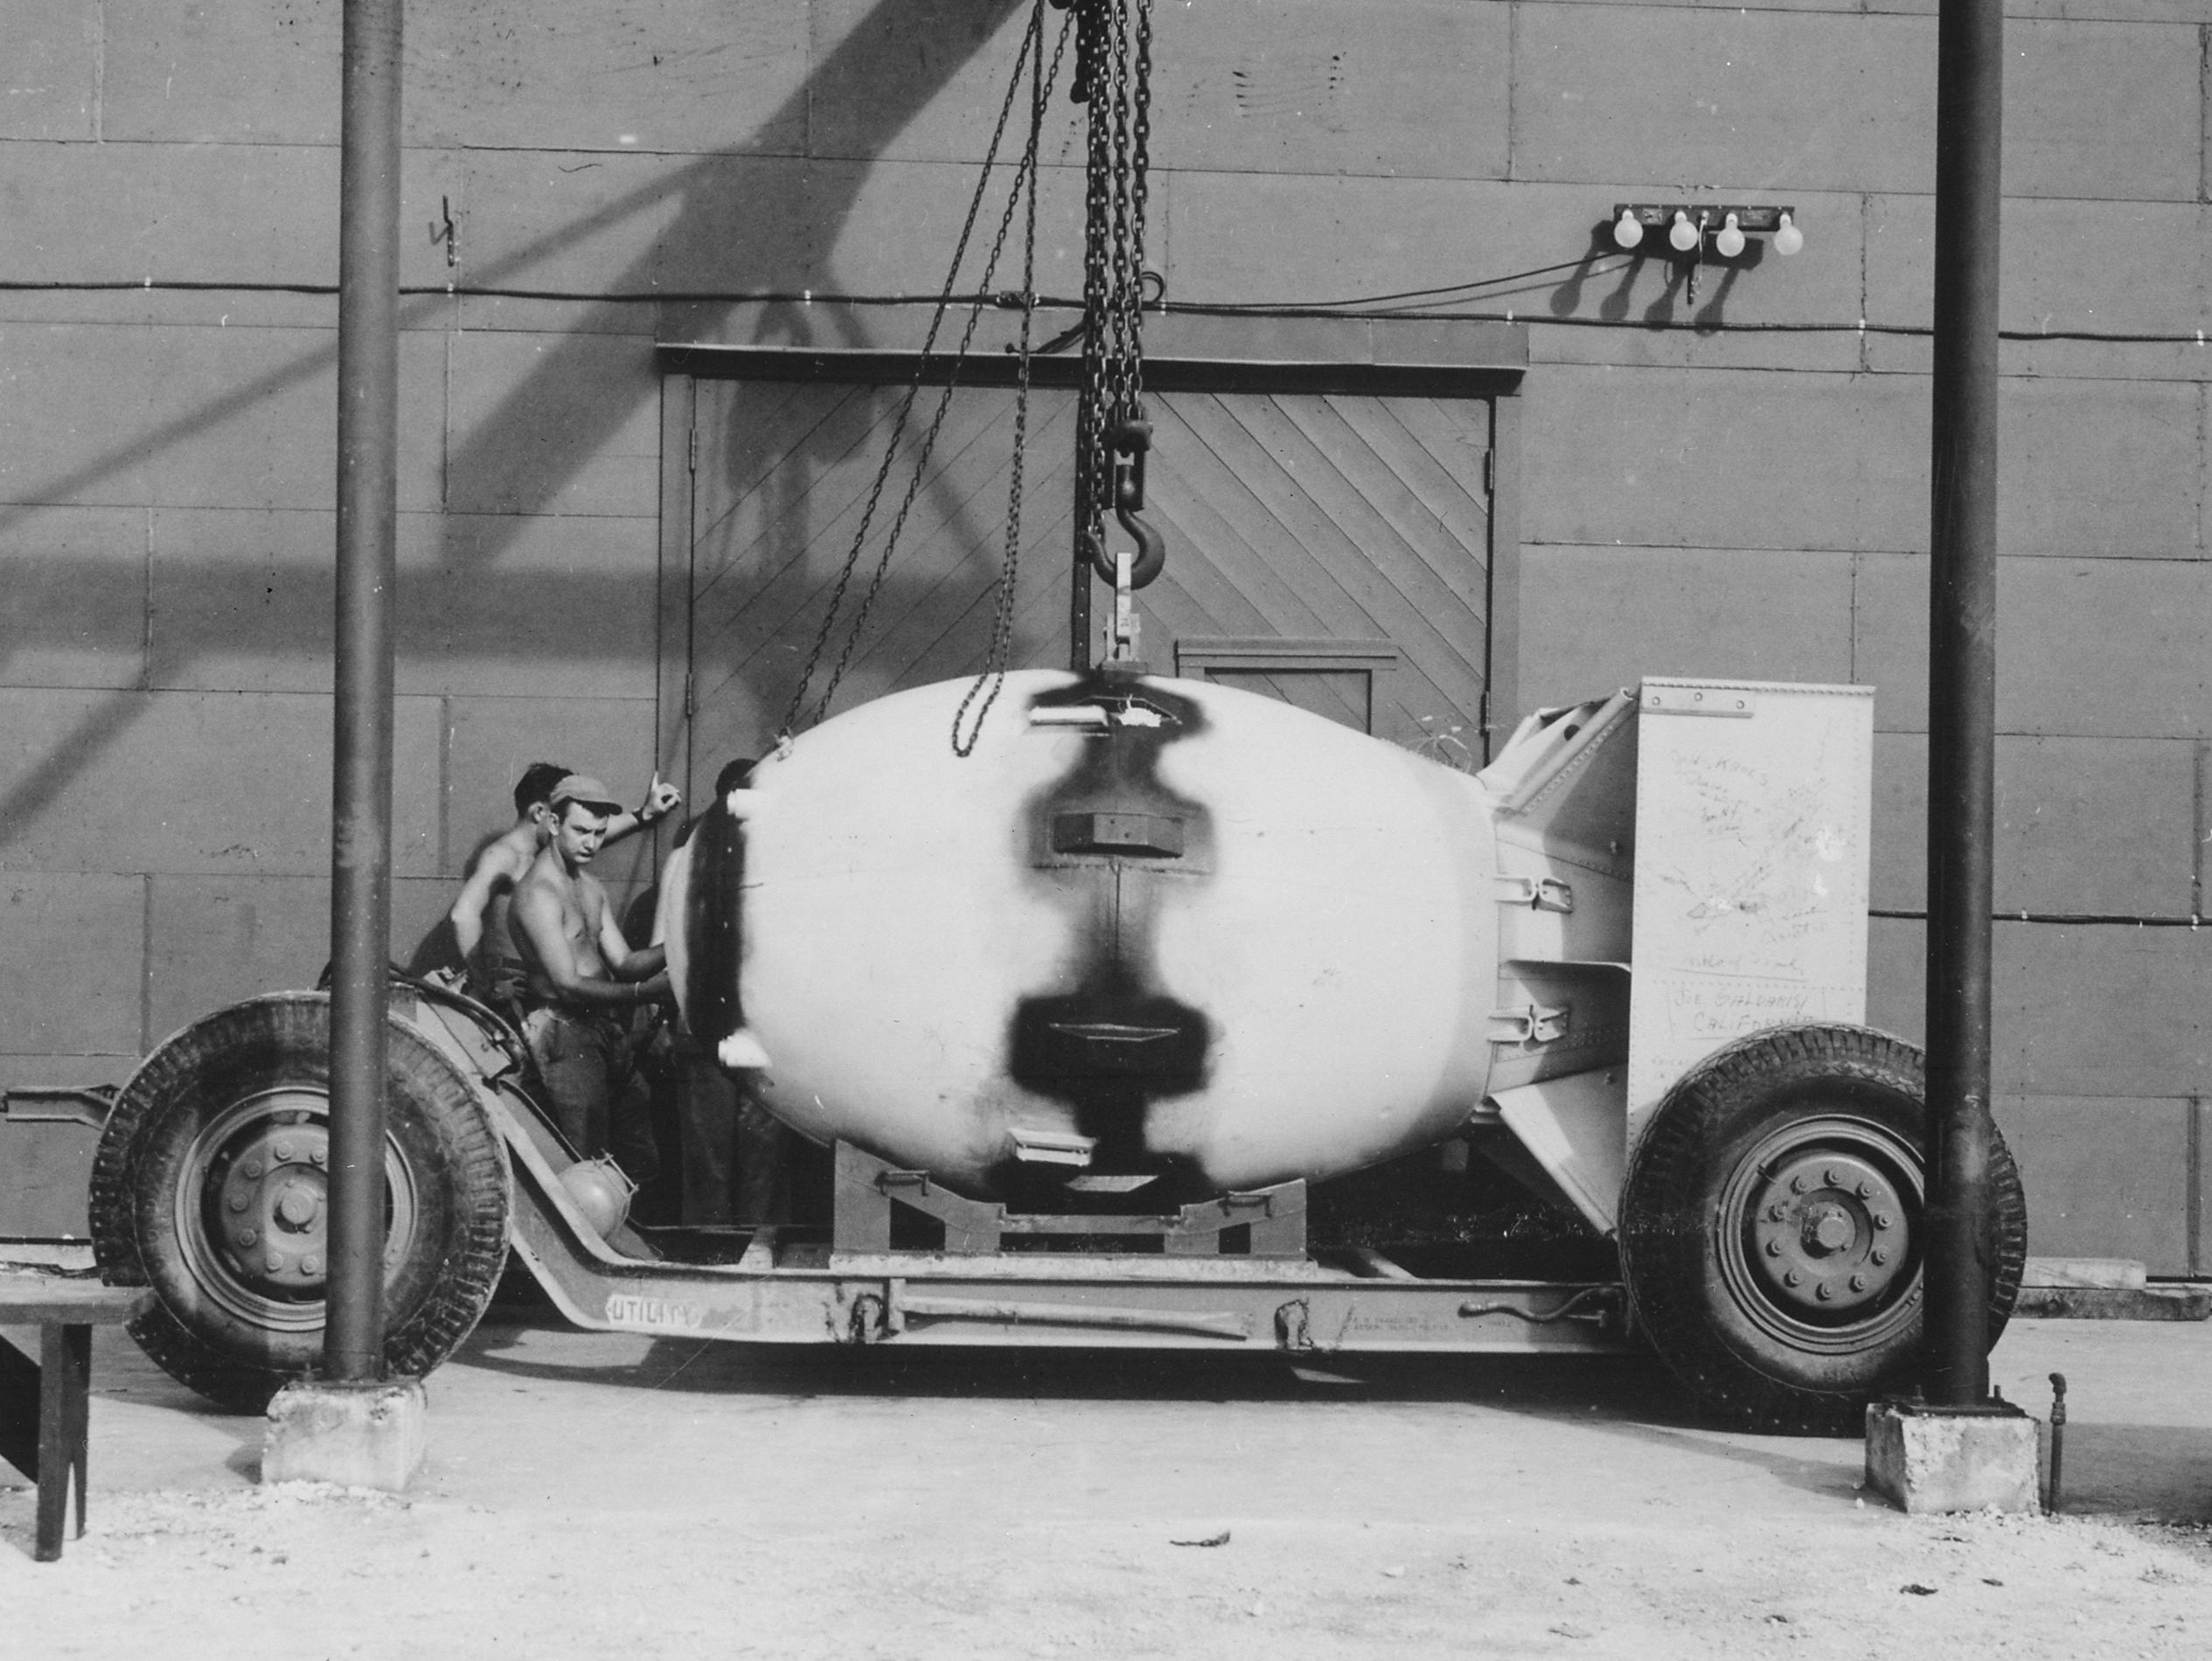 Fat Man - Nagasaki atomic bomb being transported for use, 1945